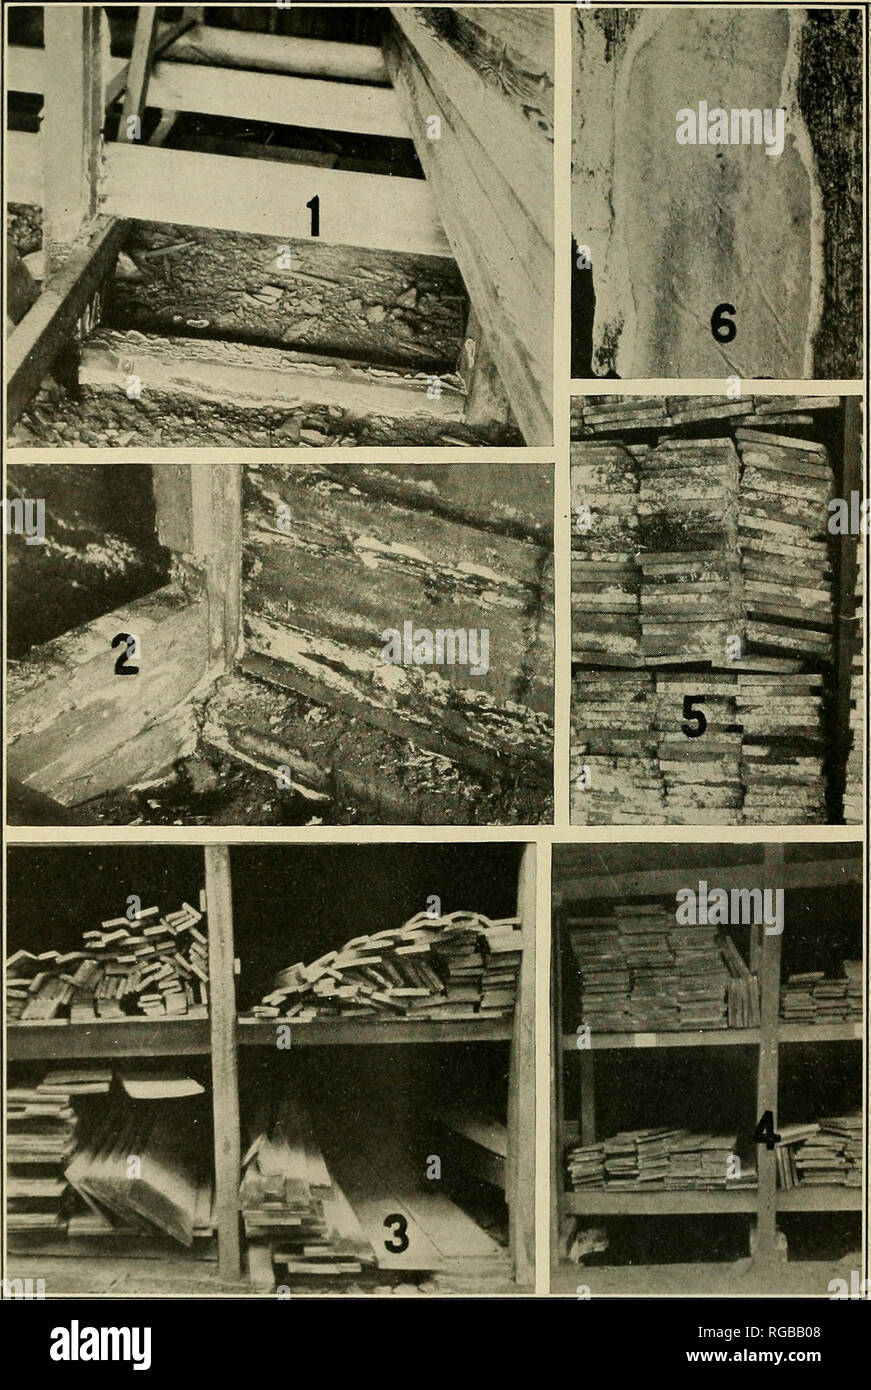 . Bulletin of the U.S. Department of Agriculture. Agriculture; Agriculture. Bui. 510, U. S. Dept. of Agriculture. Plate X.. Lumber Sanitation: Wood-Rotting Fungi.—X. Figs. 1 to 4.—A severe infection of an unidentified fungus in an Alaljama lumber yard: 1, Open shed where the fungus has progres.scd upward to the second bin, 5 feet from the ground; 2, corner of closed shed on the same premises where rolls of tarred roofing paper resting on the floor (not shown in the picture) were severely rotted at the ends; 3, the shed shown in figure 1, showhig how the infection started by piling too close to Stock Photo